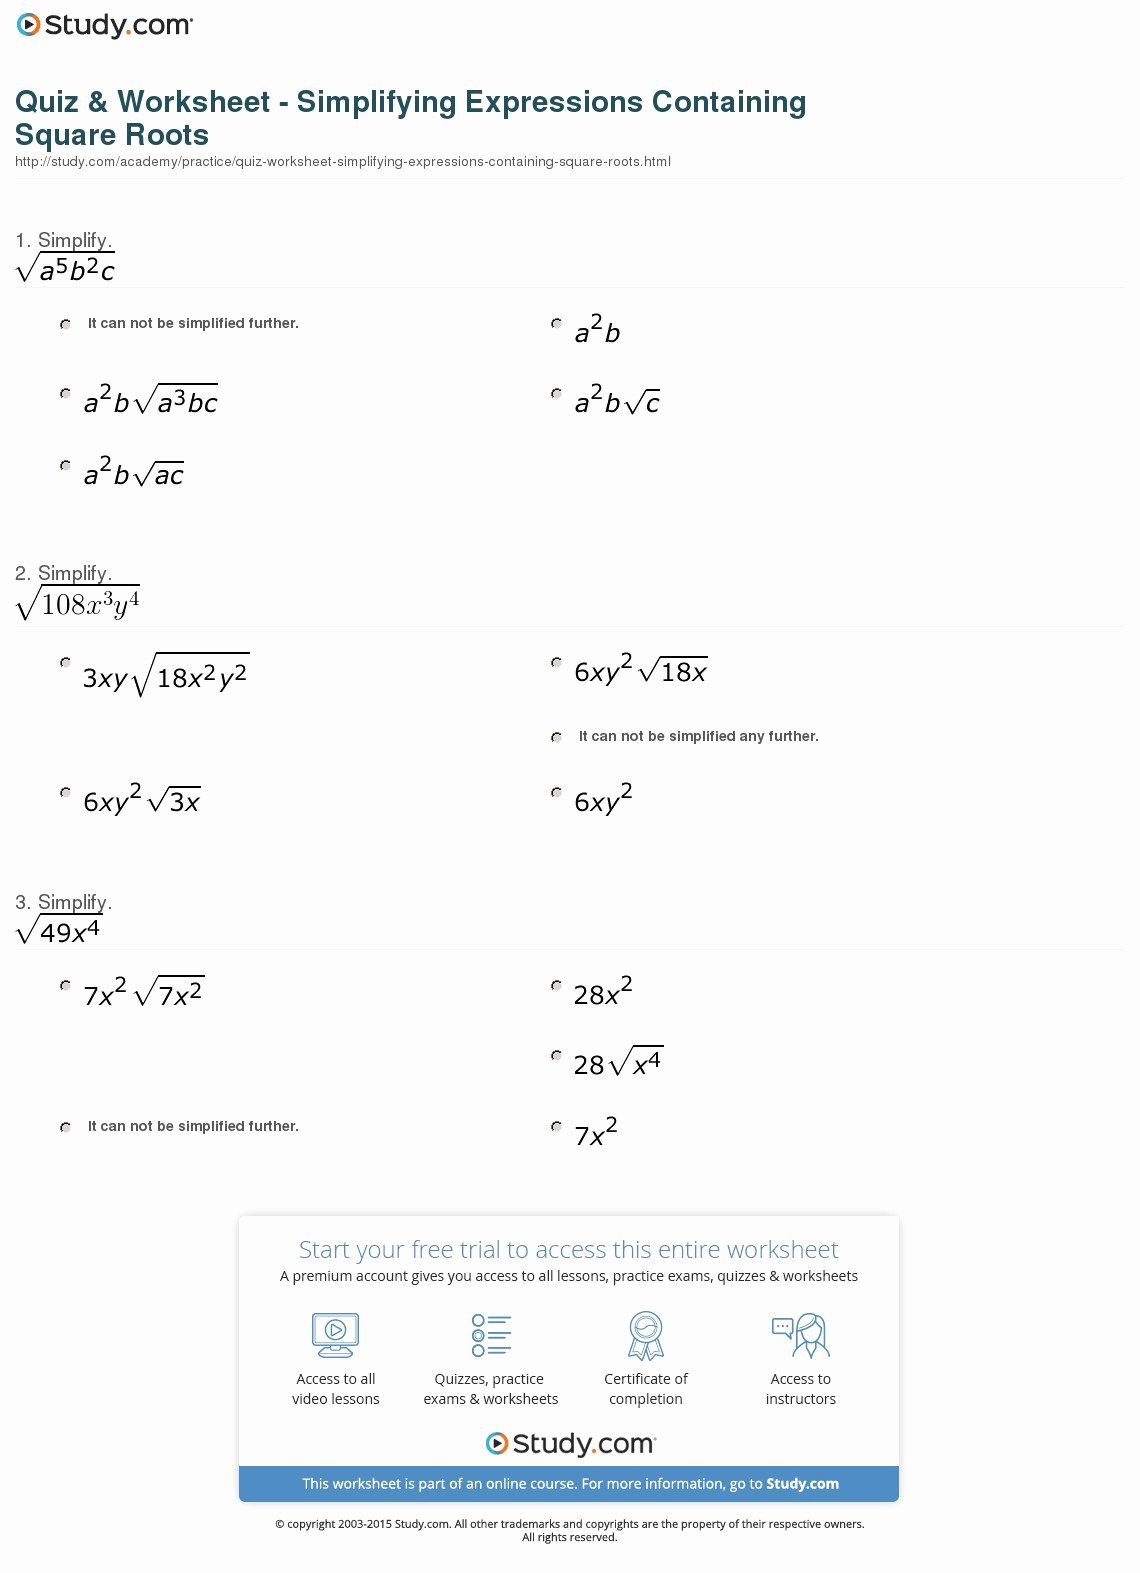 Simplify Square Roots Worksheet Inspirational Quiz &amp; Worksheet Simplifying Expressions Containing